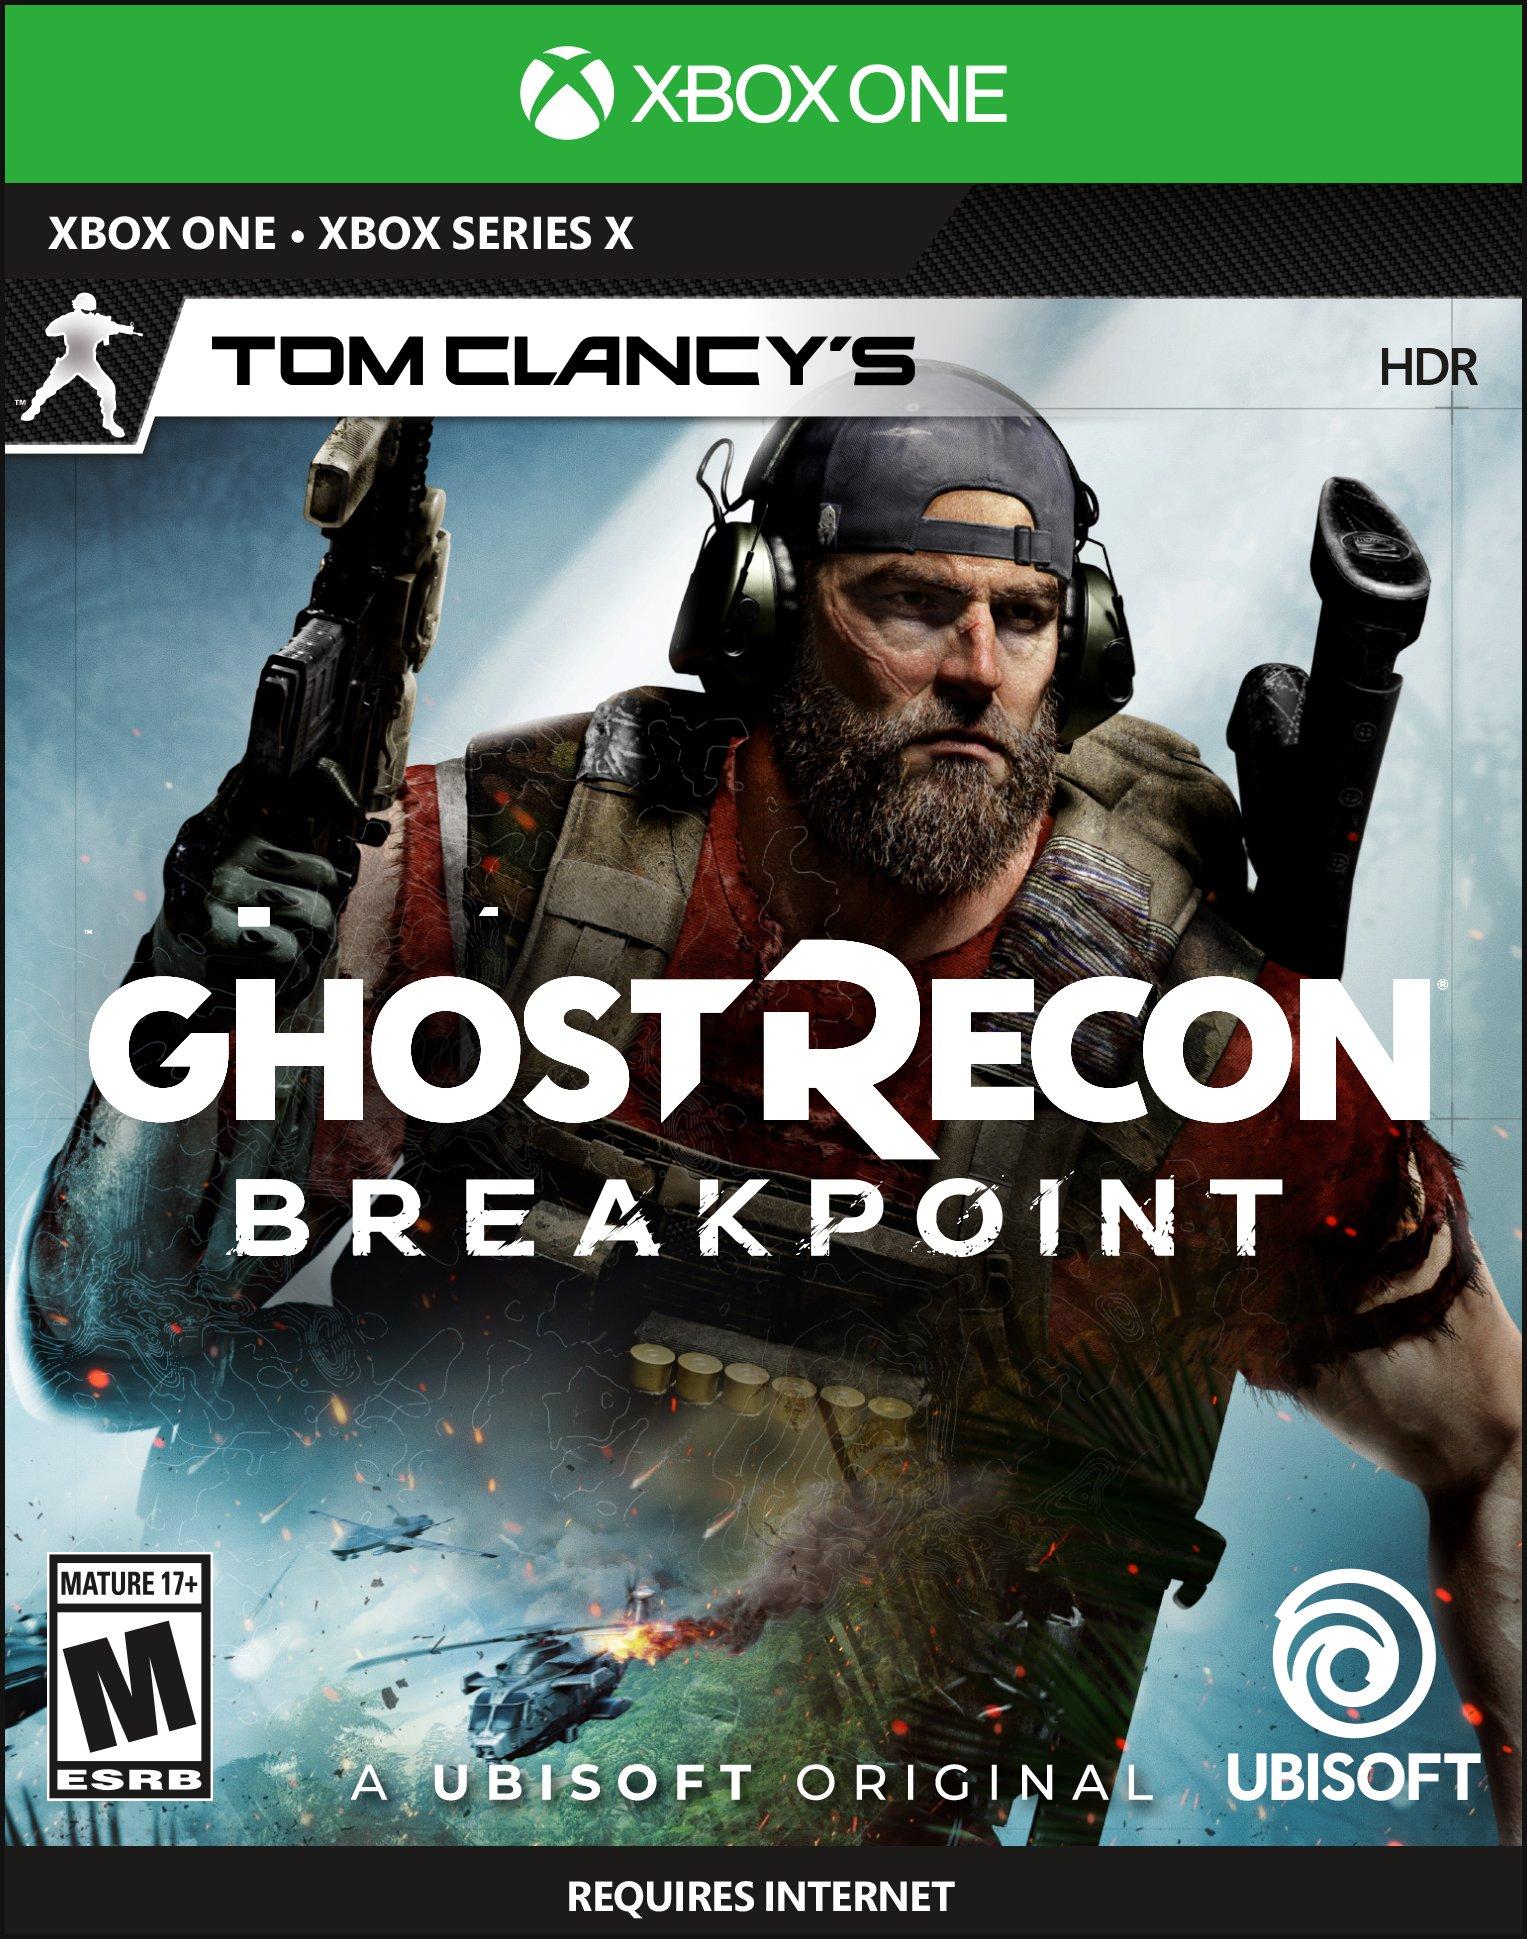 ghost recon xbox one